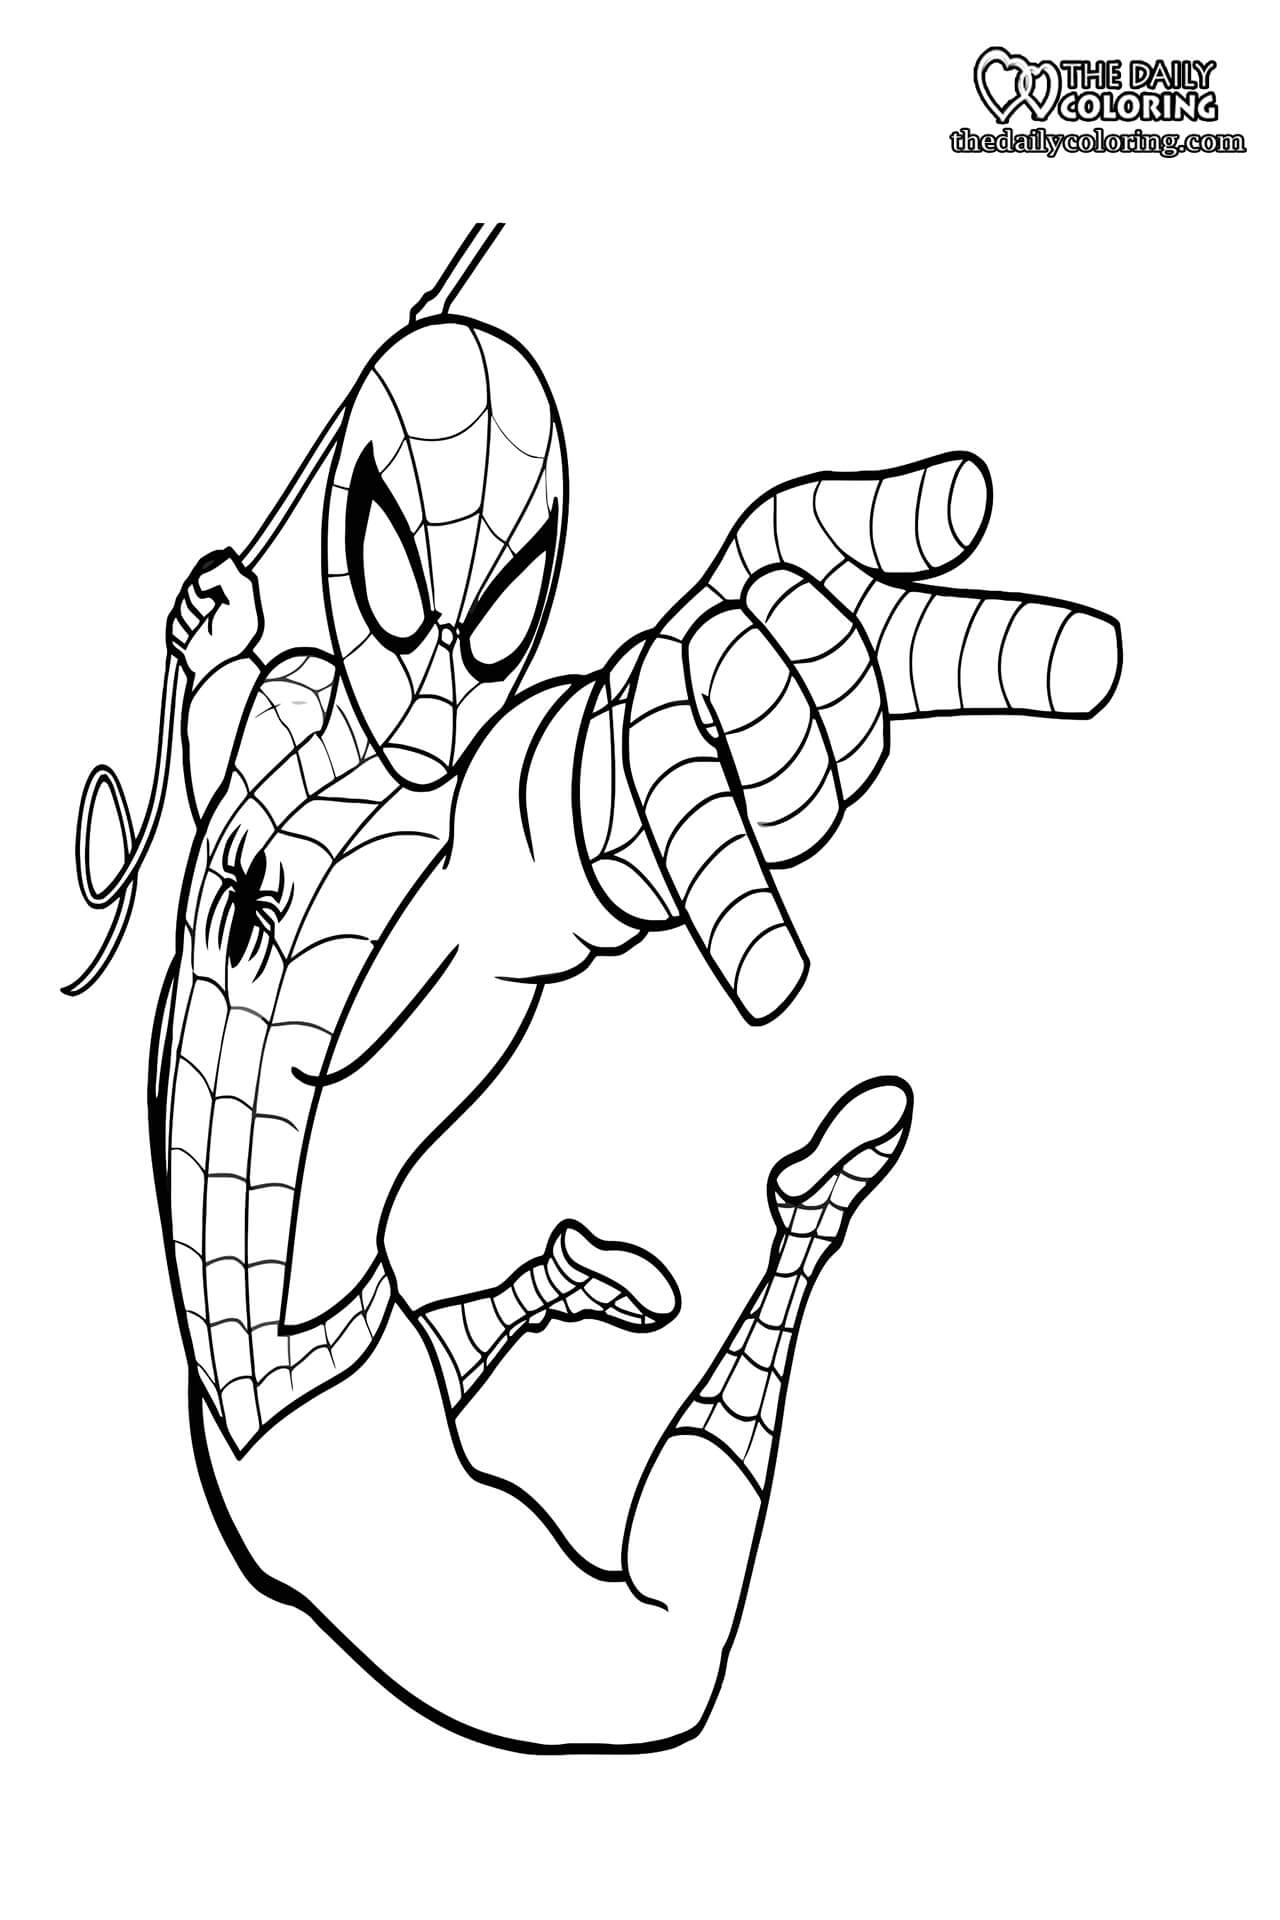 spiderman-coloring-pages